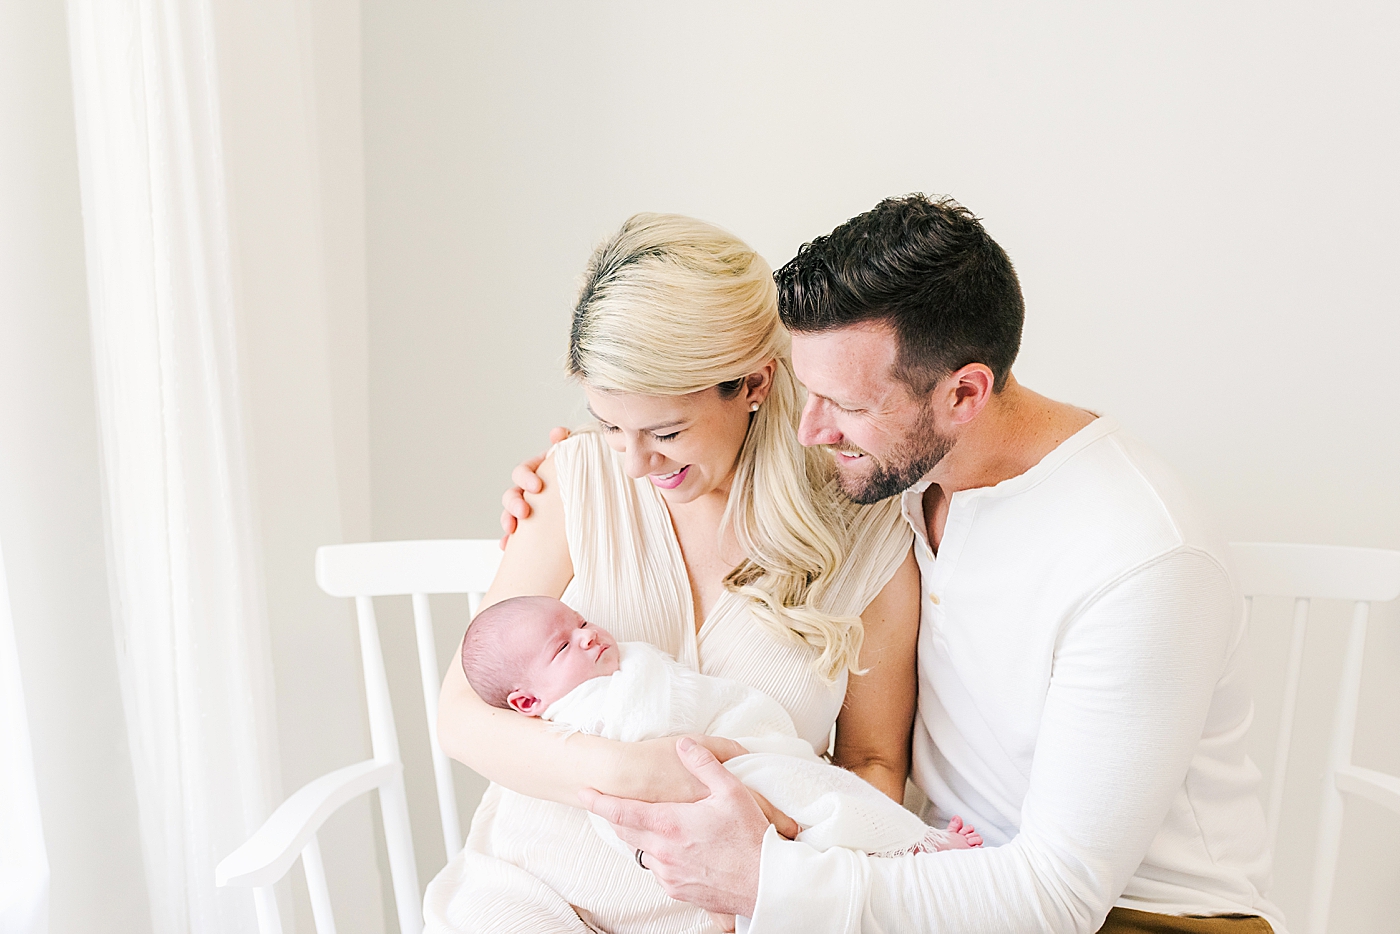 Mom and dad smiling at their new baby | Photo by Ballantyne newborn photographer Anna Wisjo 